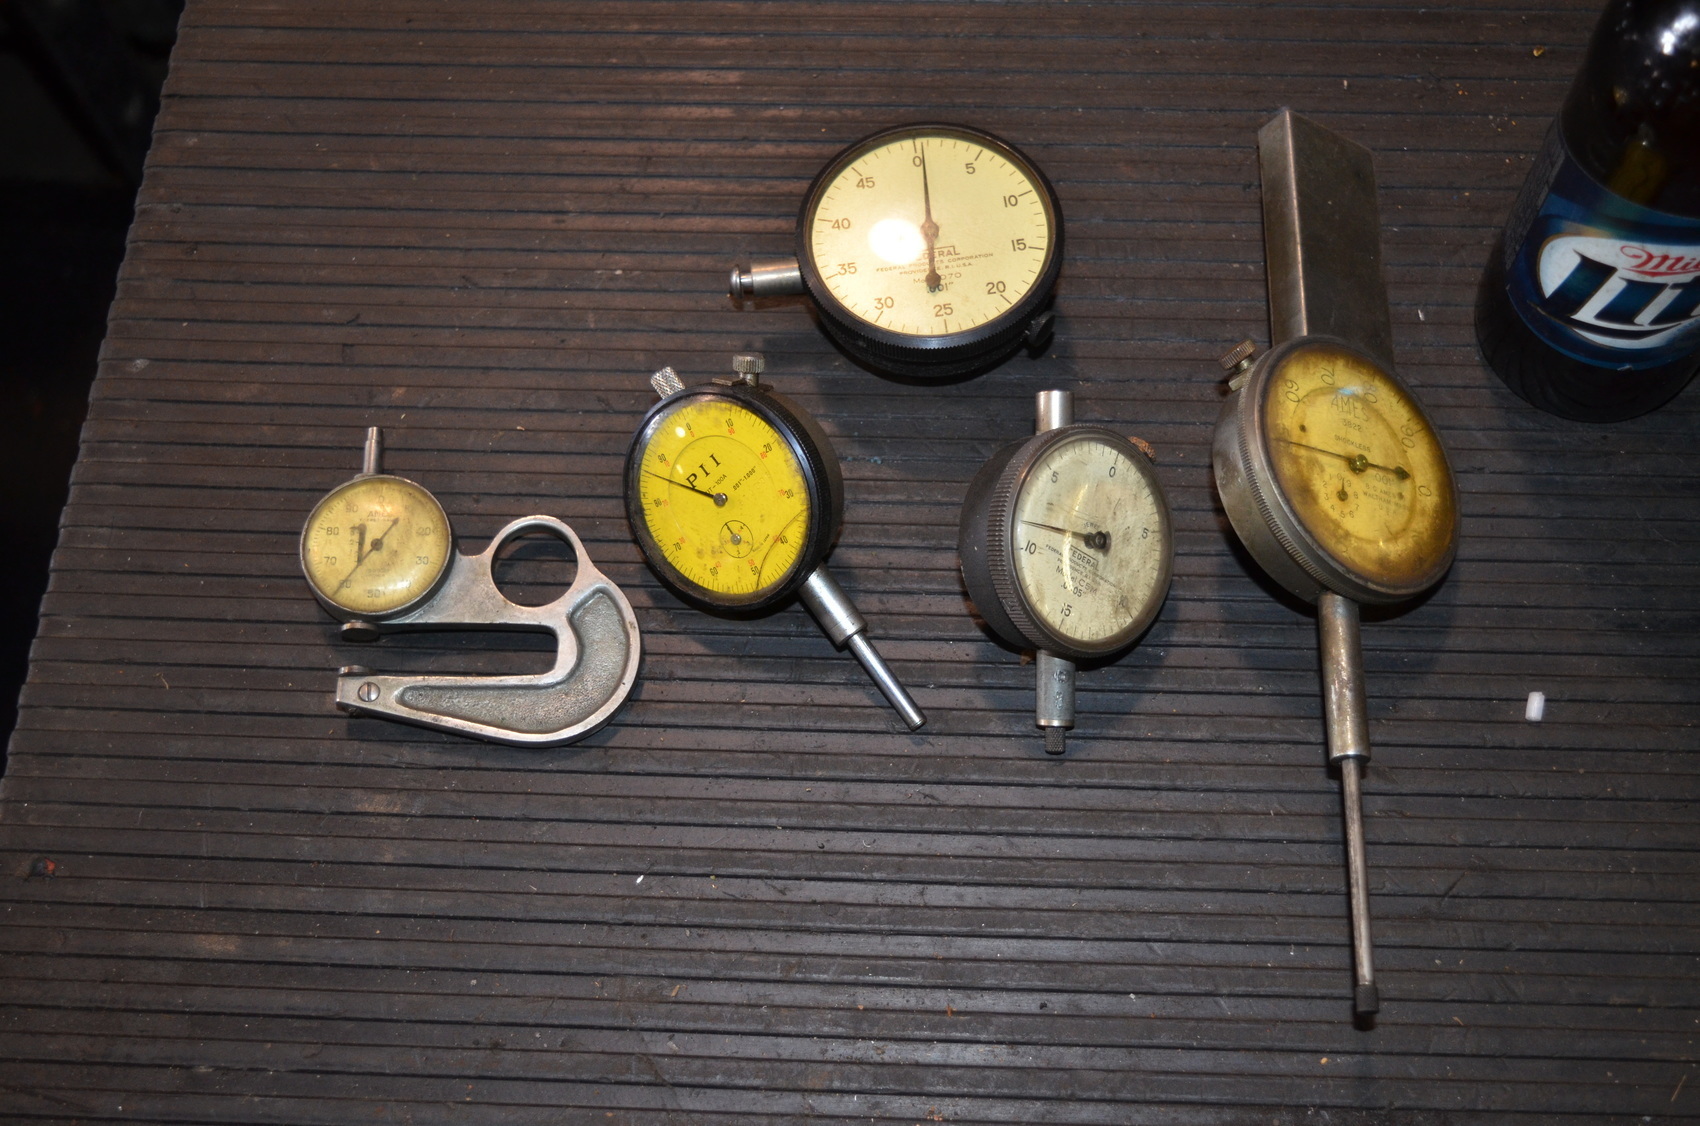 FOR PARTS Lot of 5 Dial Indicators;Ames,PII,Federal